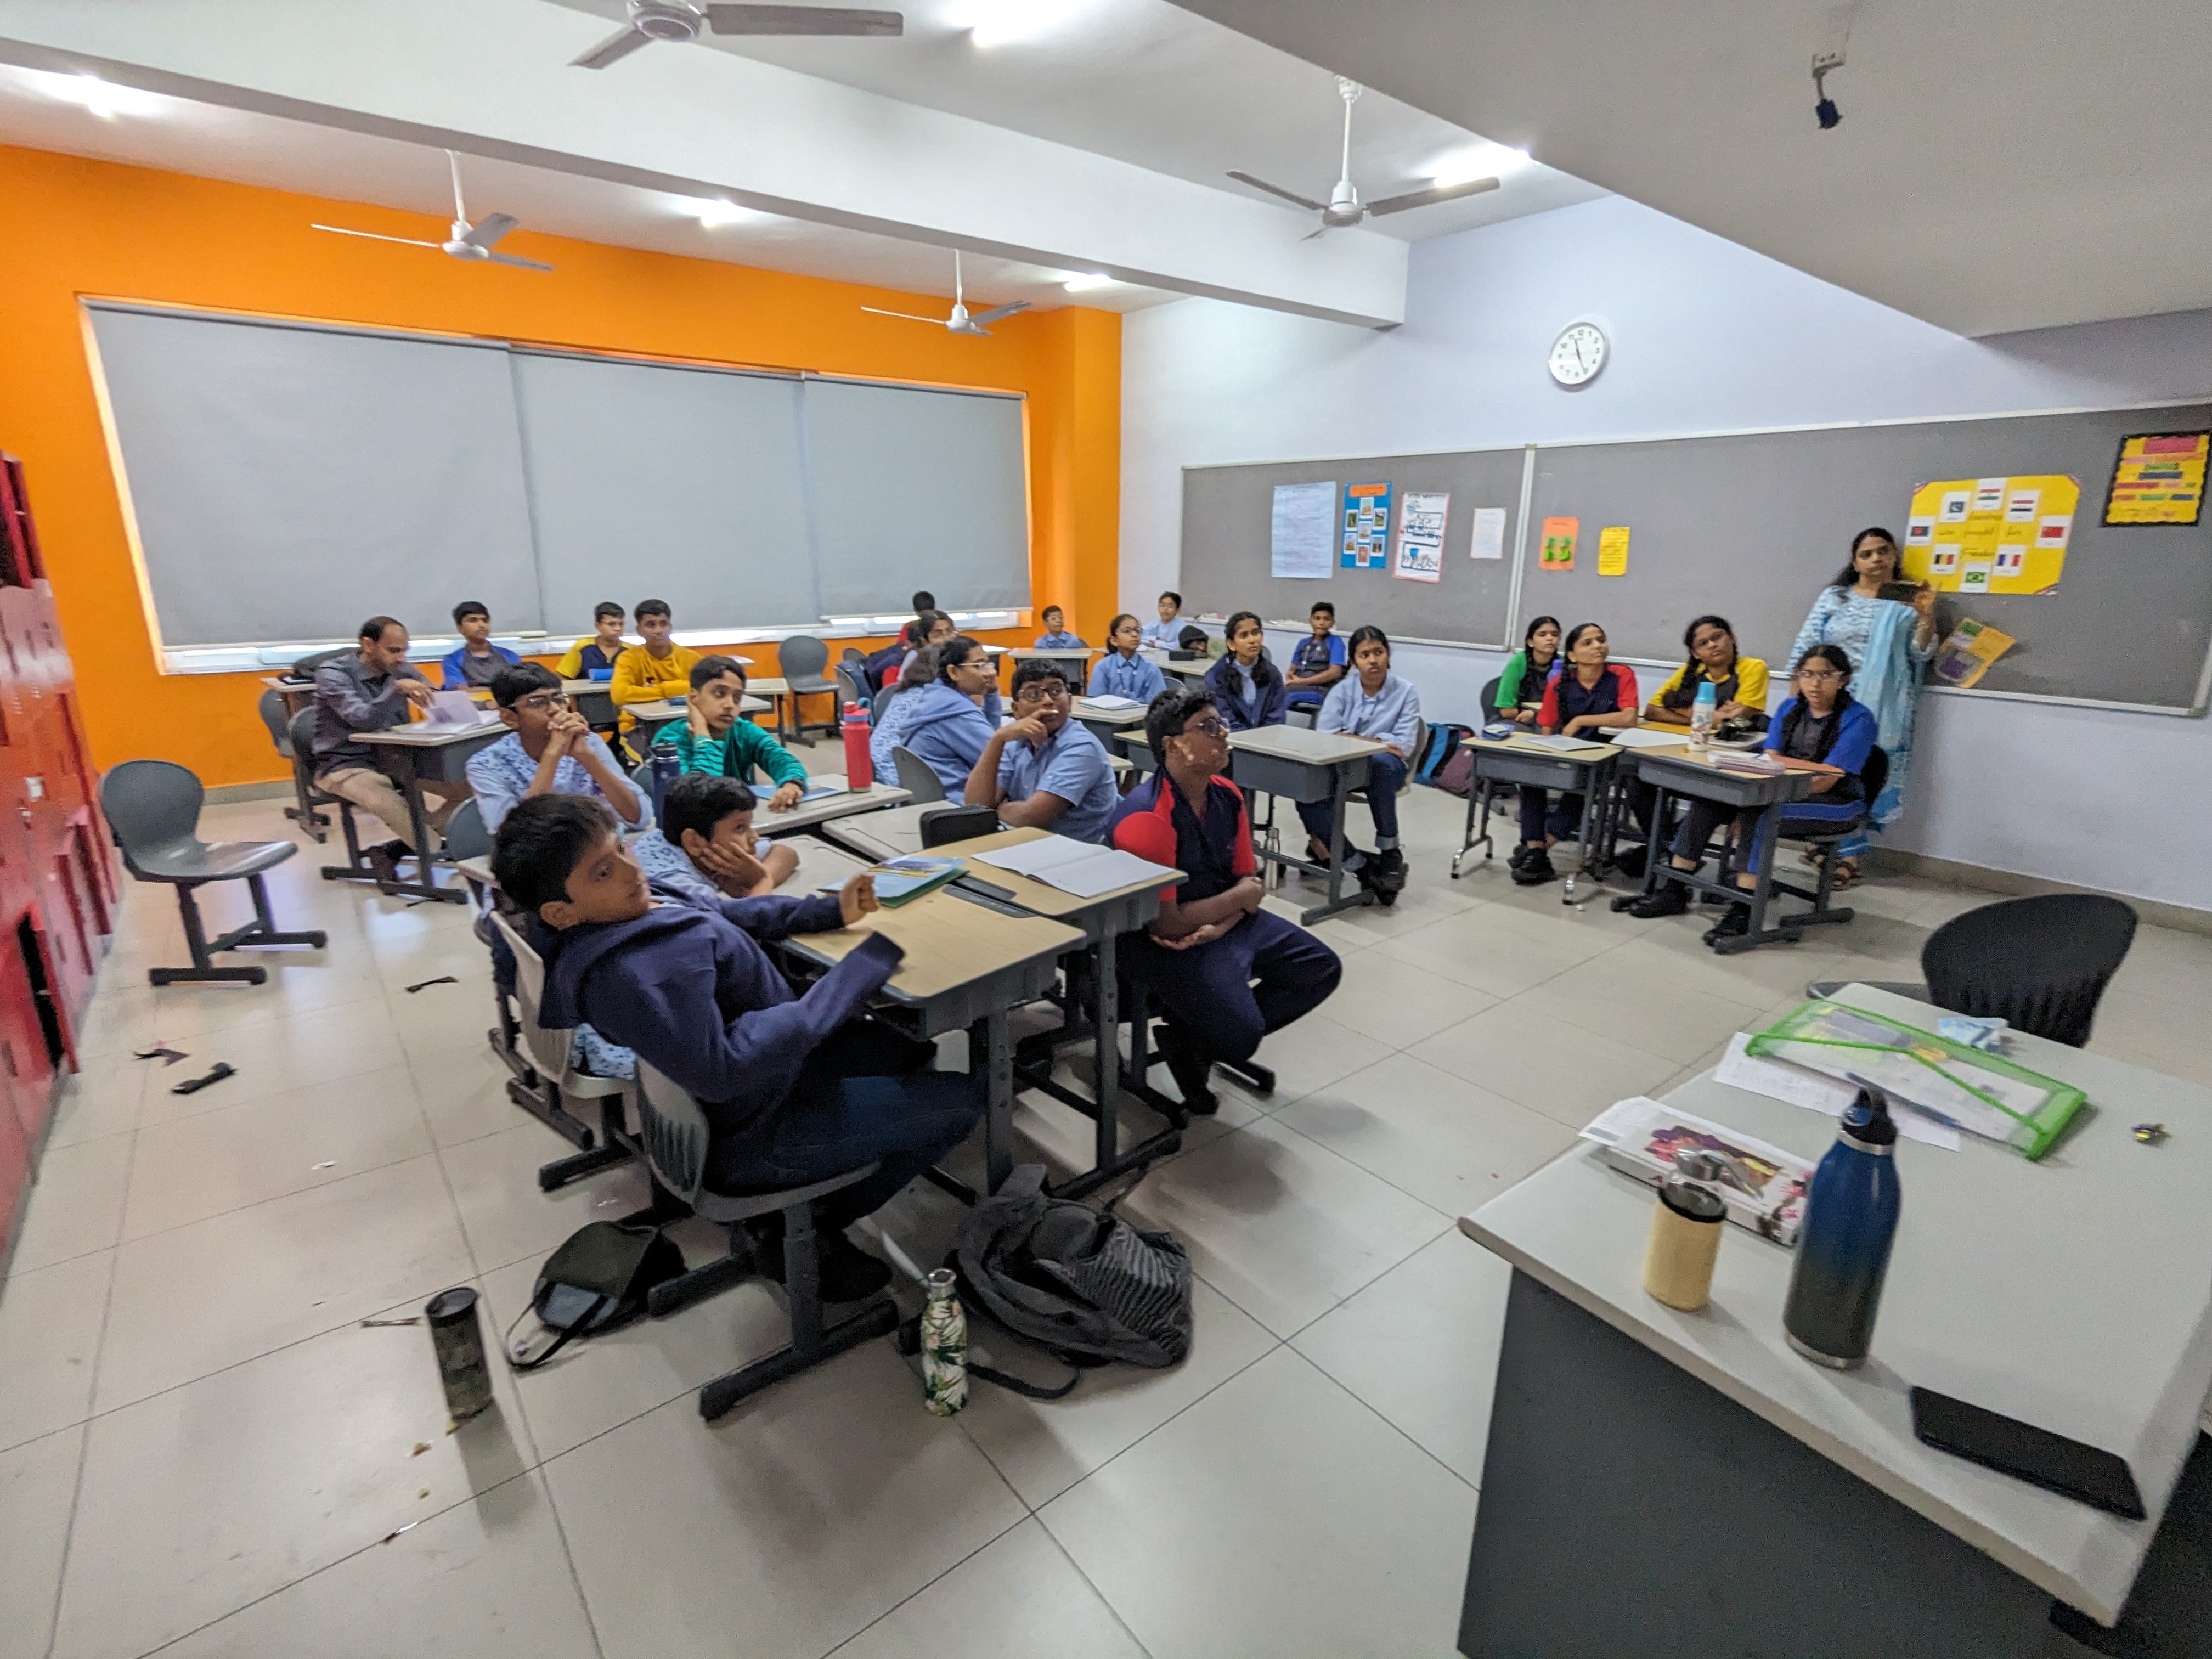 Associate Professor of Physical Therapy Education Srikant Vallabhajosula has worked with Preetha Bangalore, teacher at Ganges Valley School in Hyderabad, to talk to seventh and eighth graders about the science of biomechanics